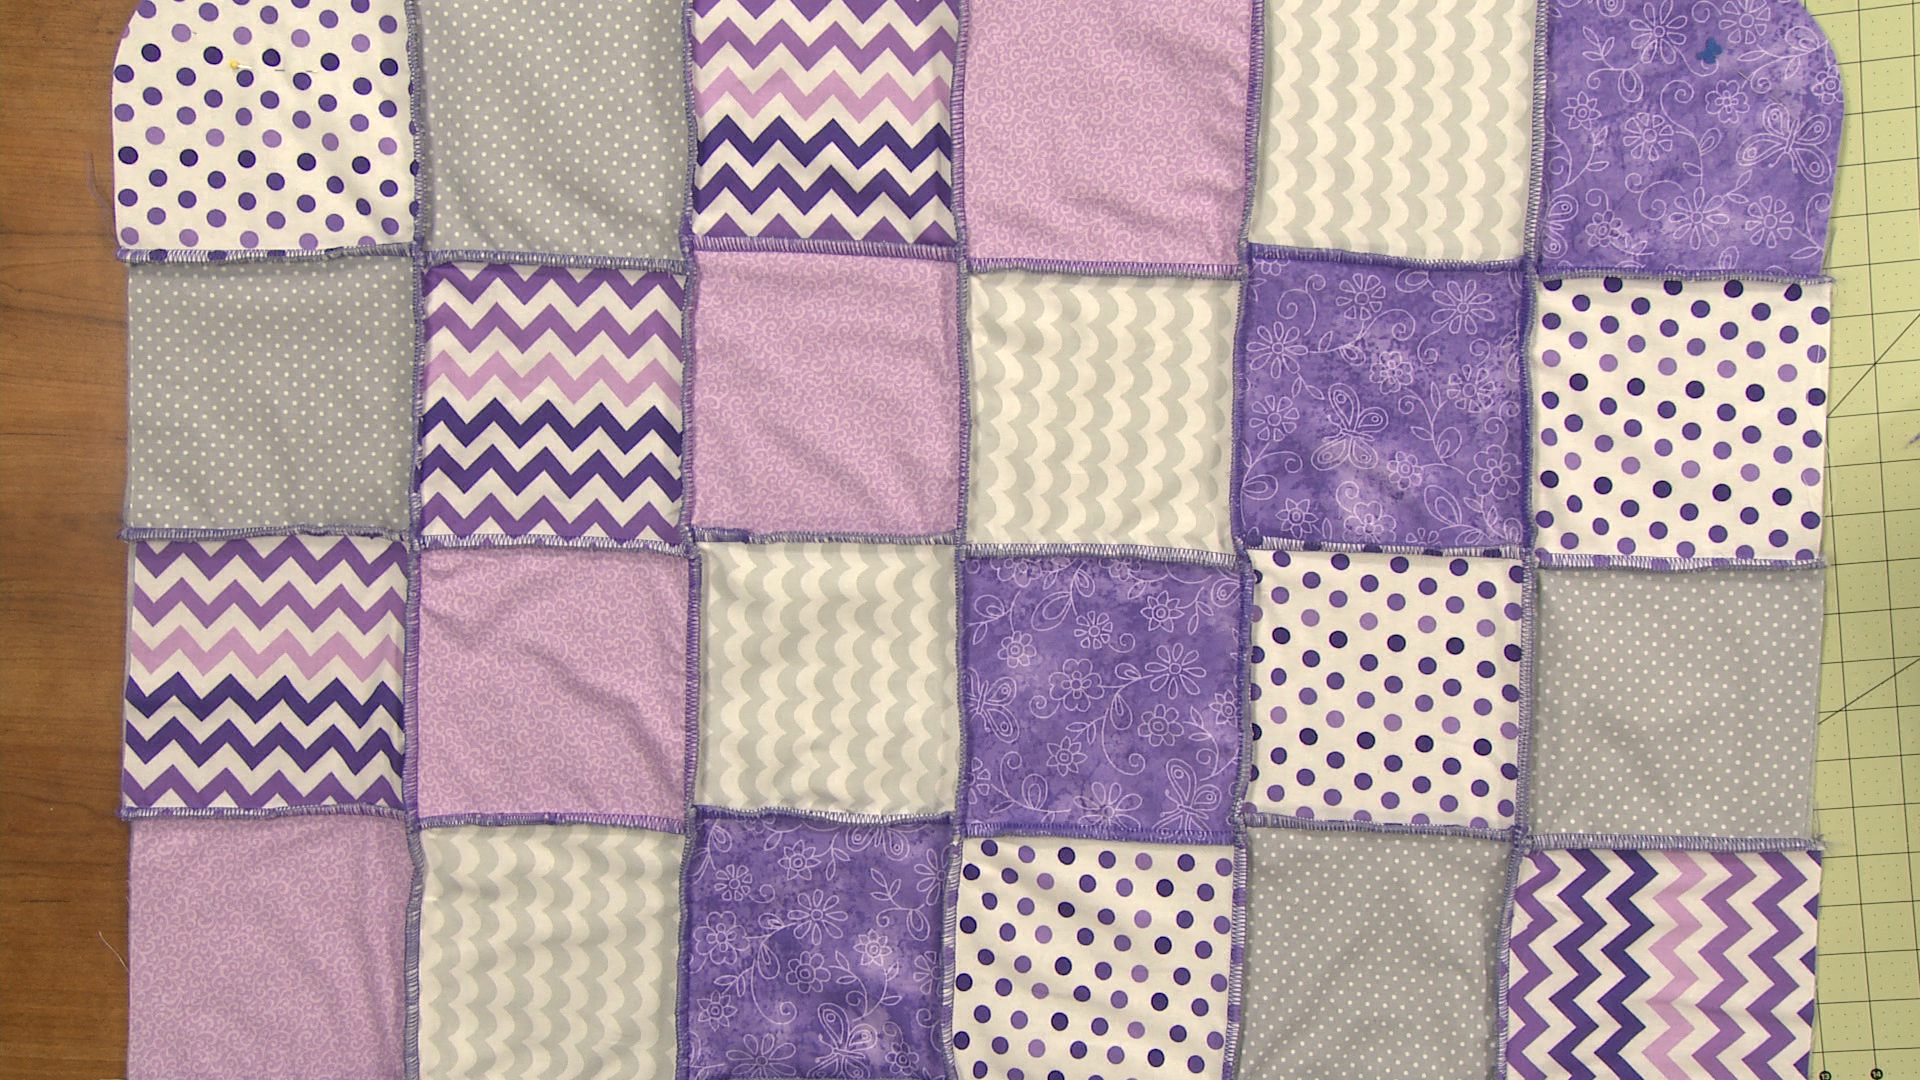 Session 4: Reversible Baby Quilt